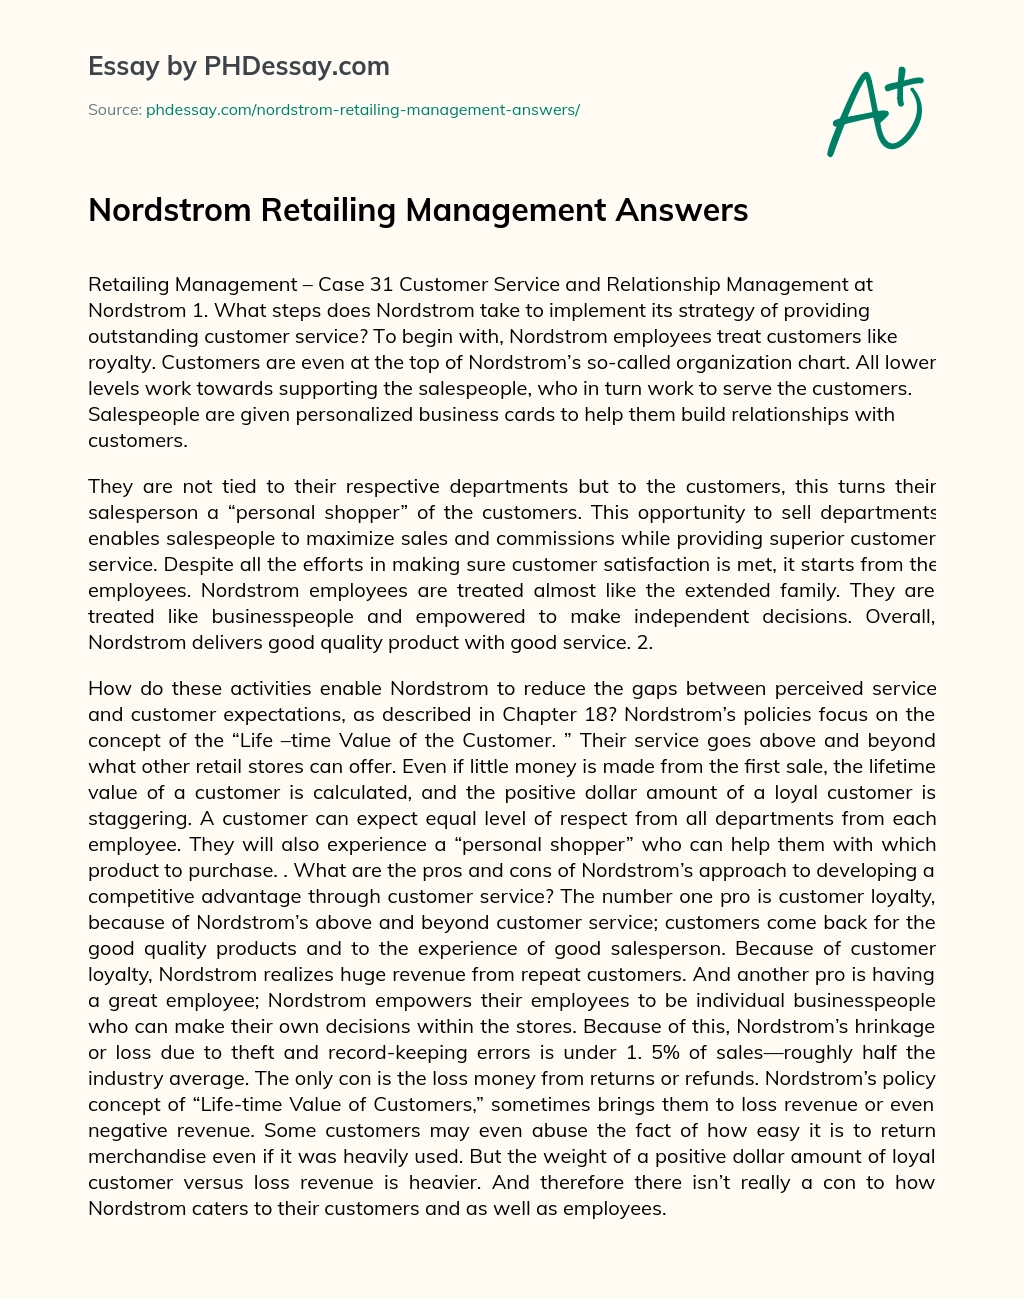 Nordstrom Retailing Management Answers essay